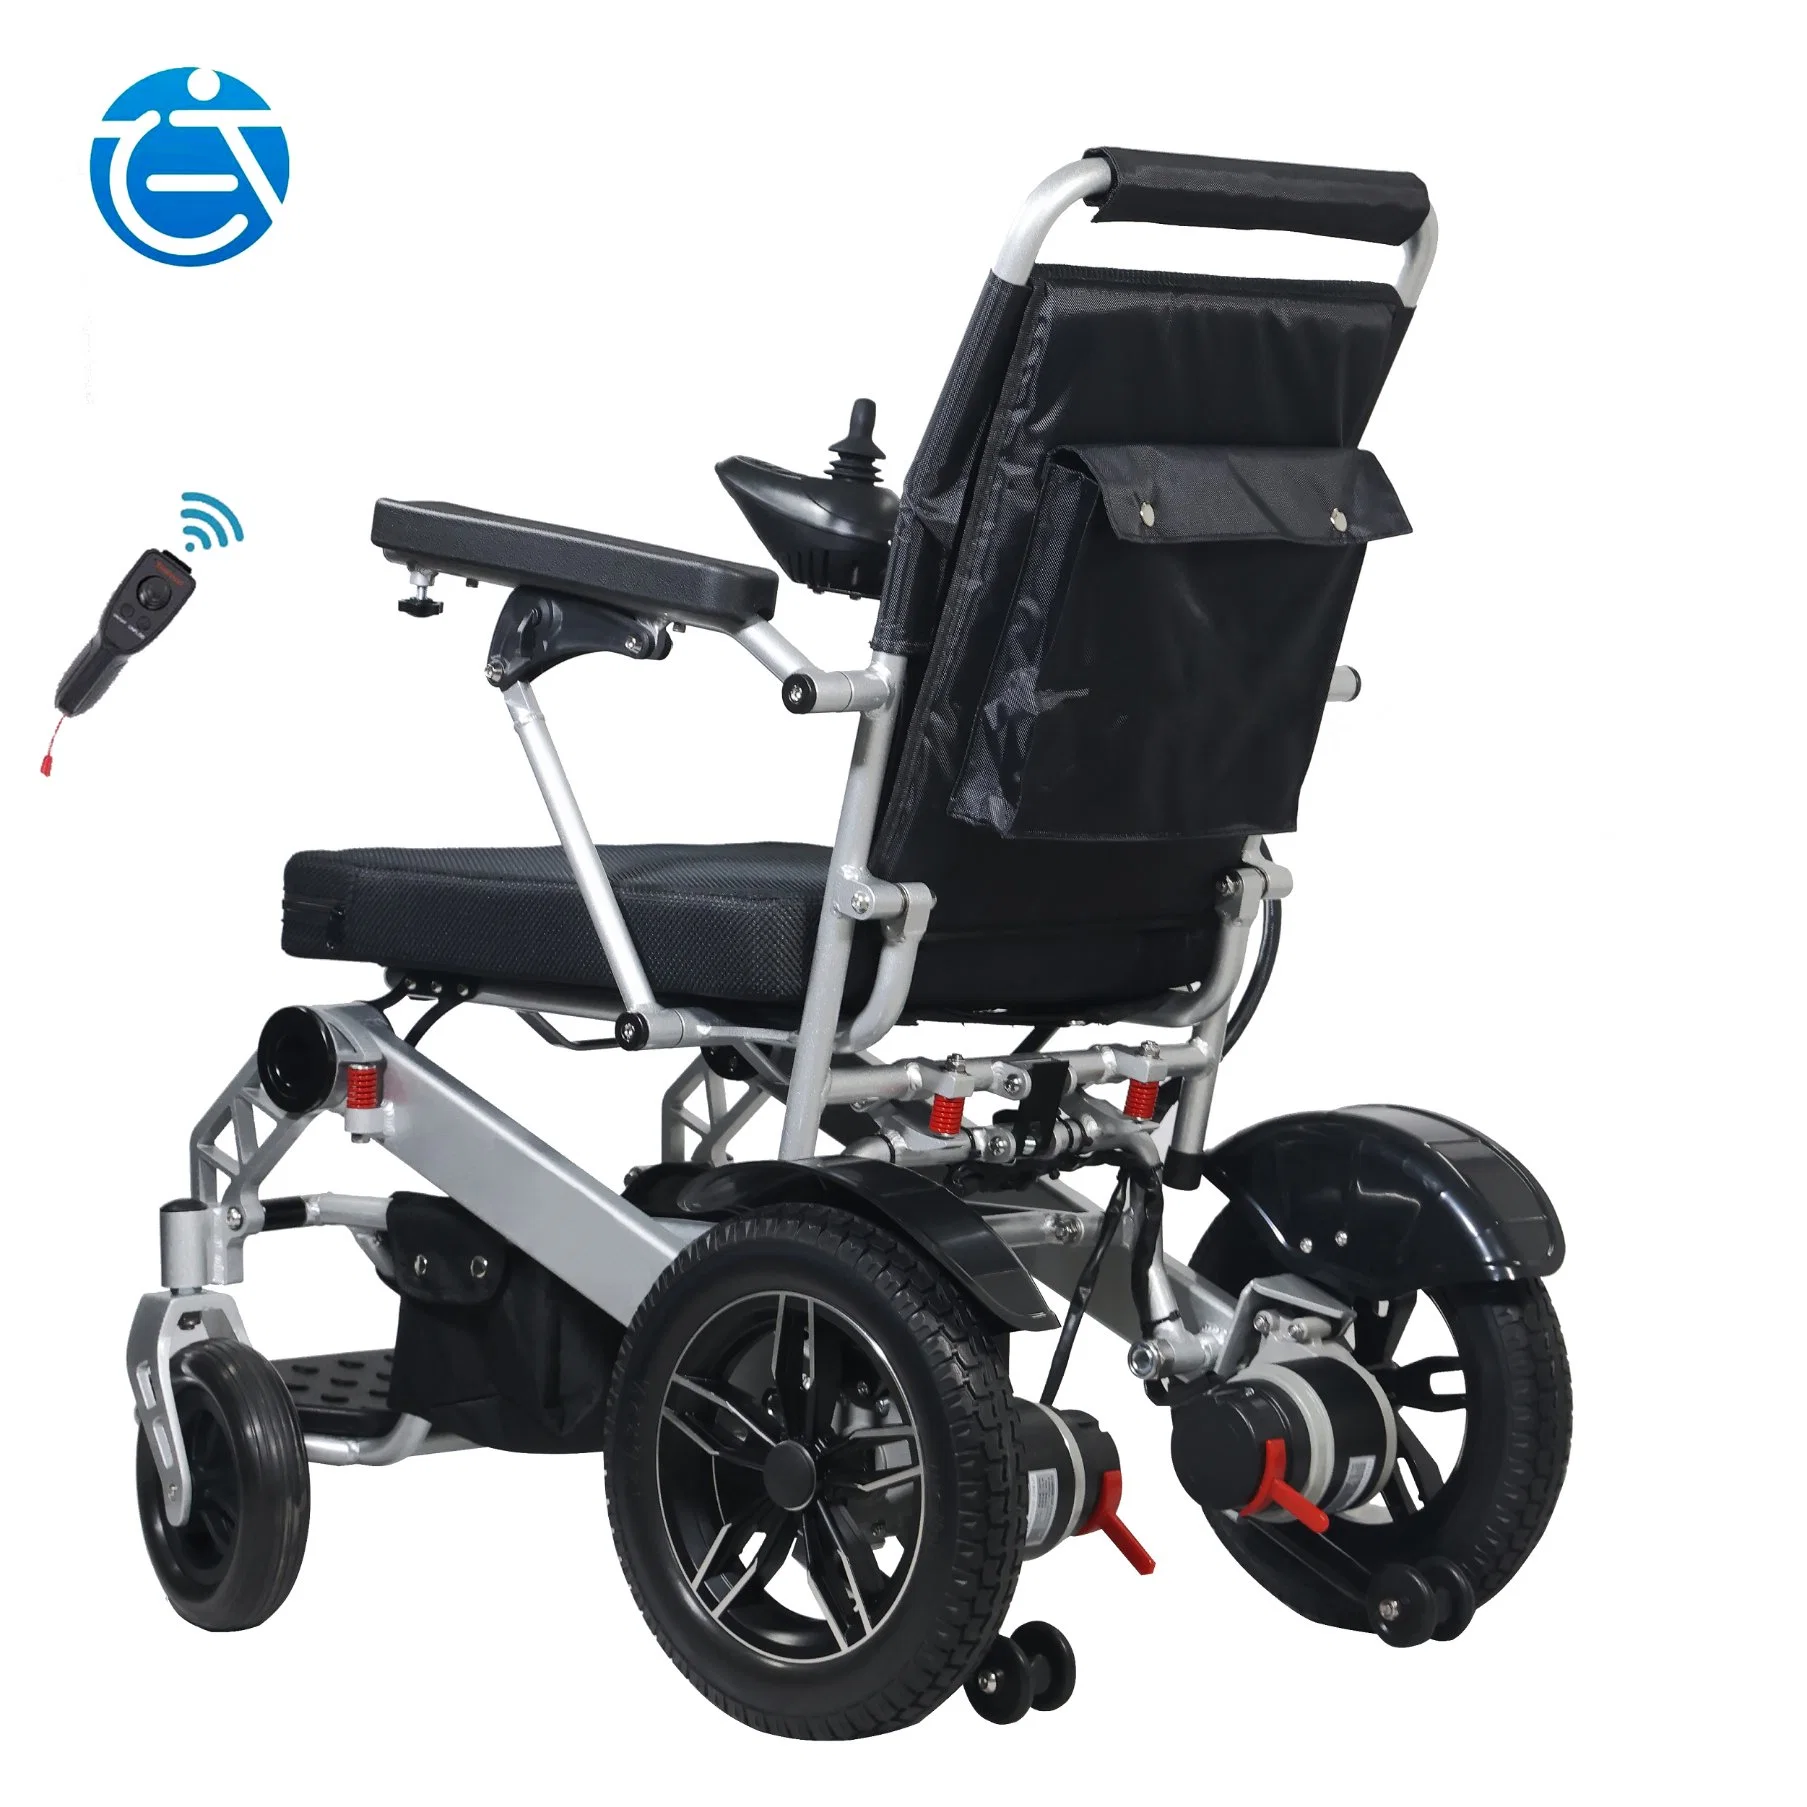 Fold up Intelligent Automatic Lightweight Folding Electric Wheelchair for Disabled Elderly